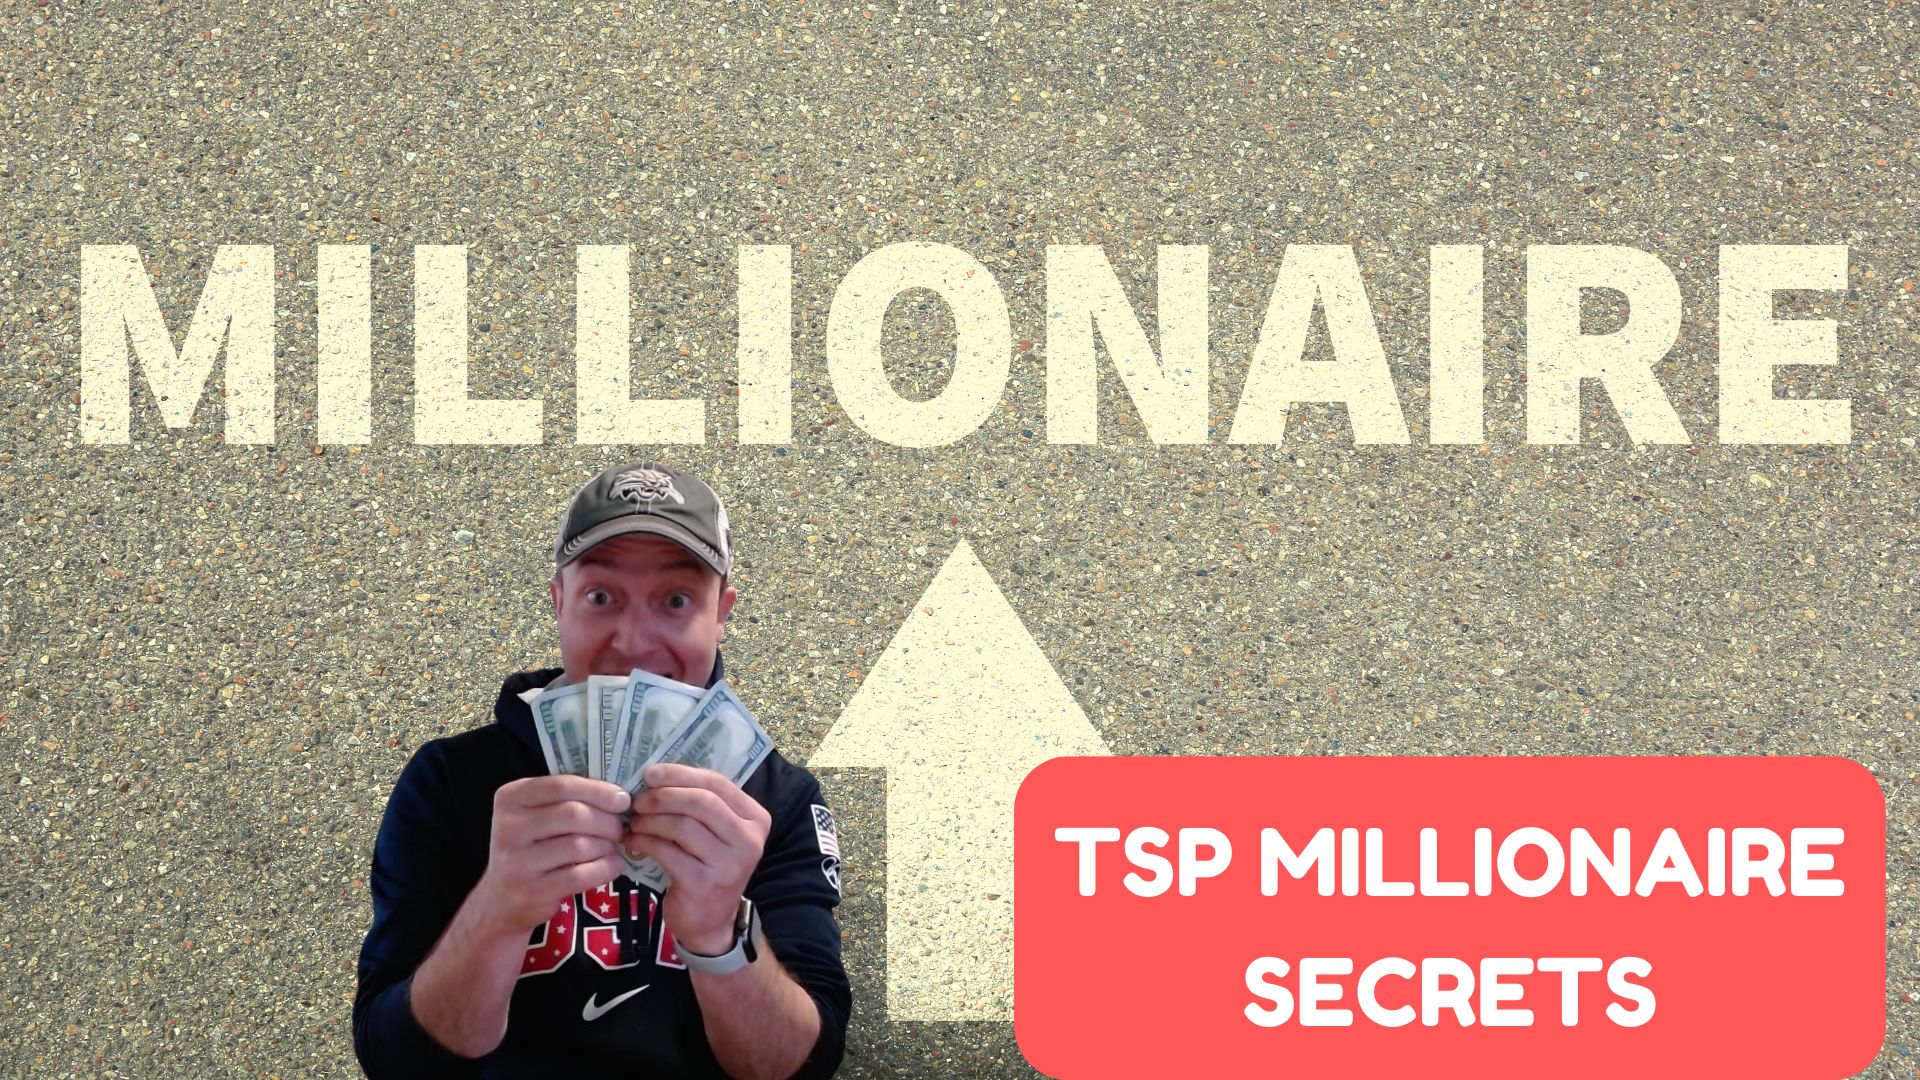 TSP Millionaire: What you can do to be in the top 1%